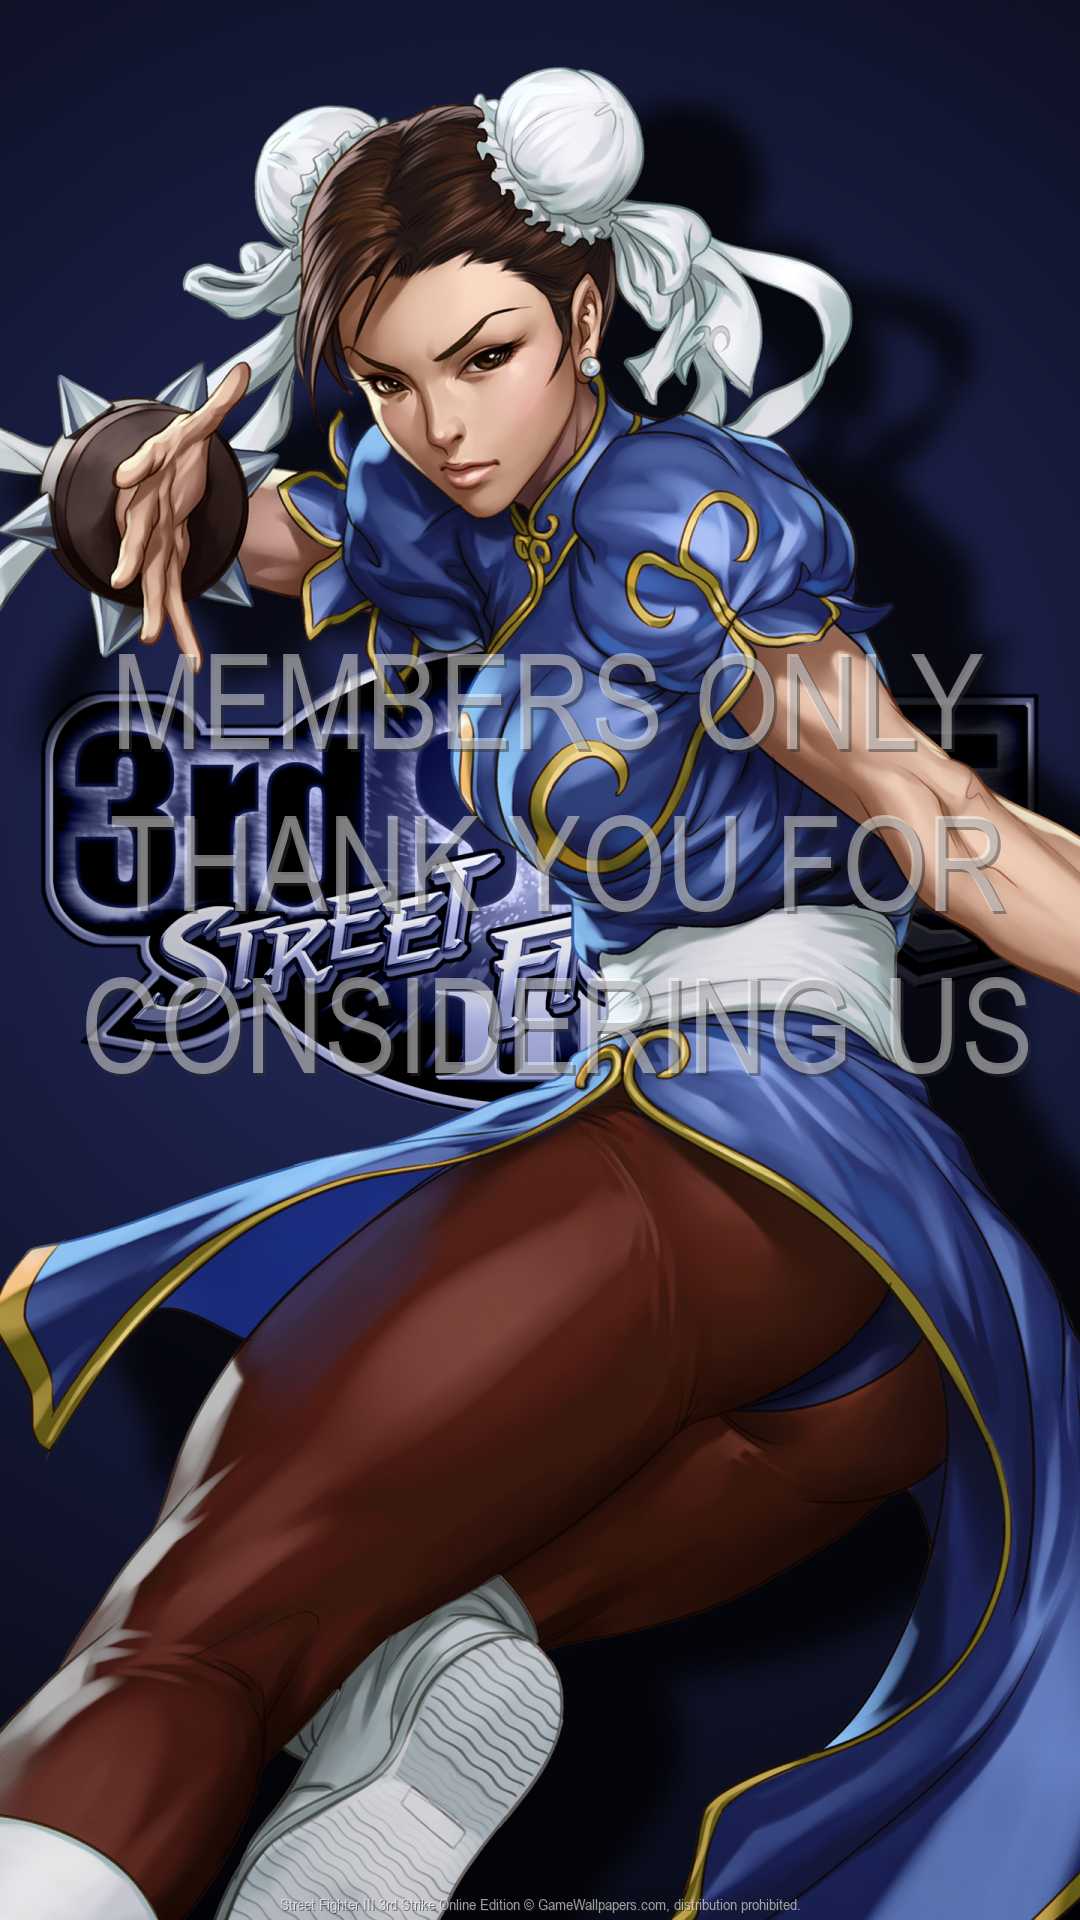 Street Fighter III: 3rd Strike Online Edition 1080p Vertical Mobile wallpaper or background 01